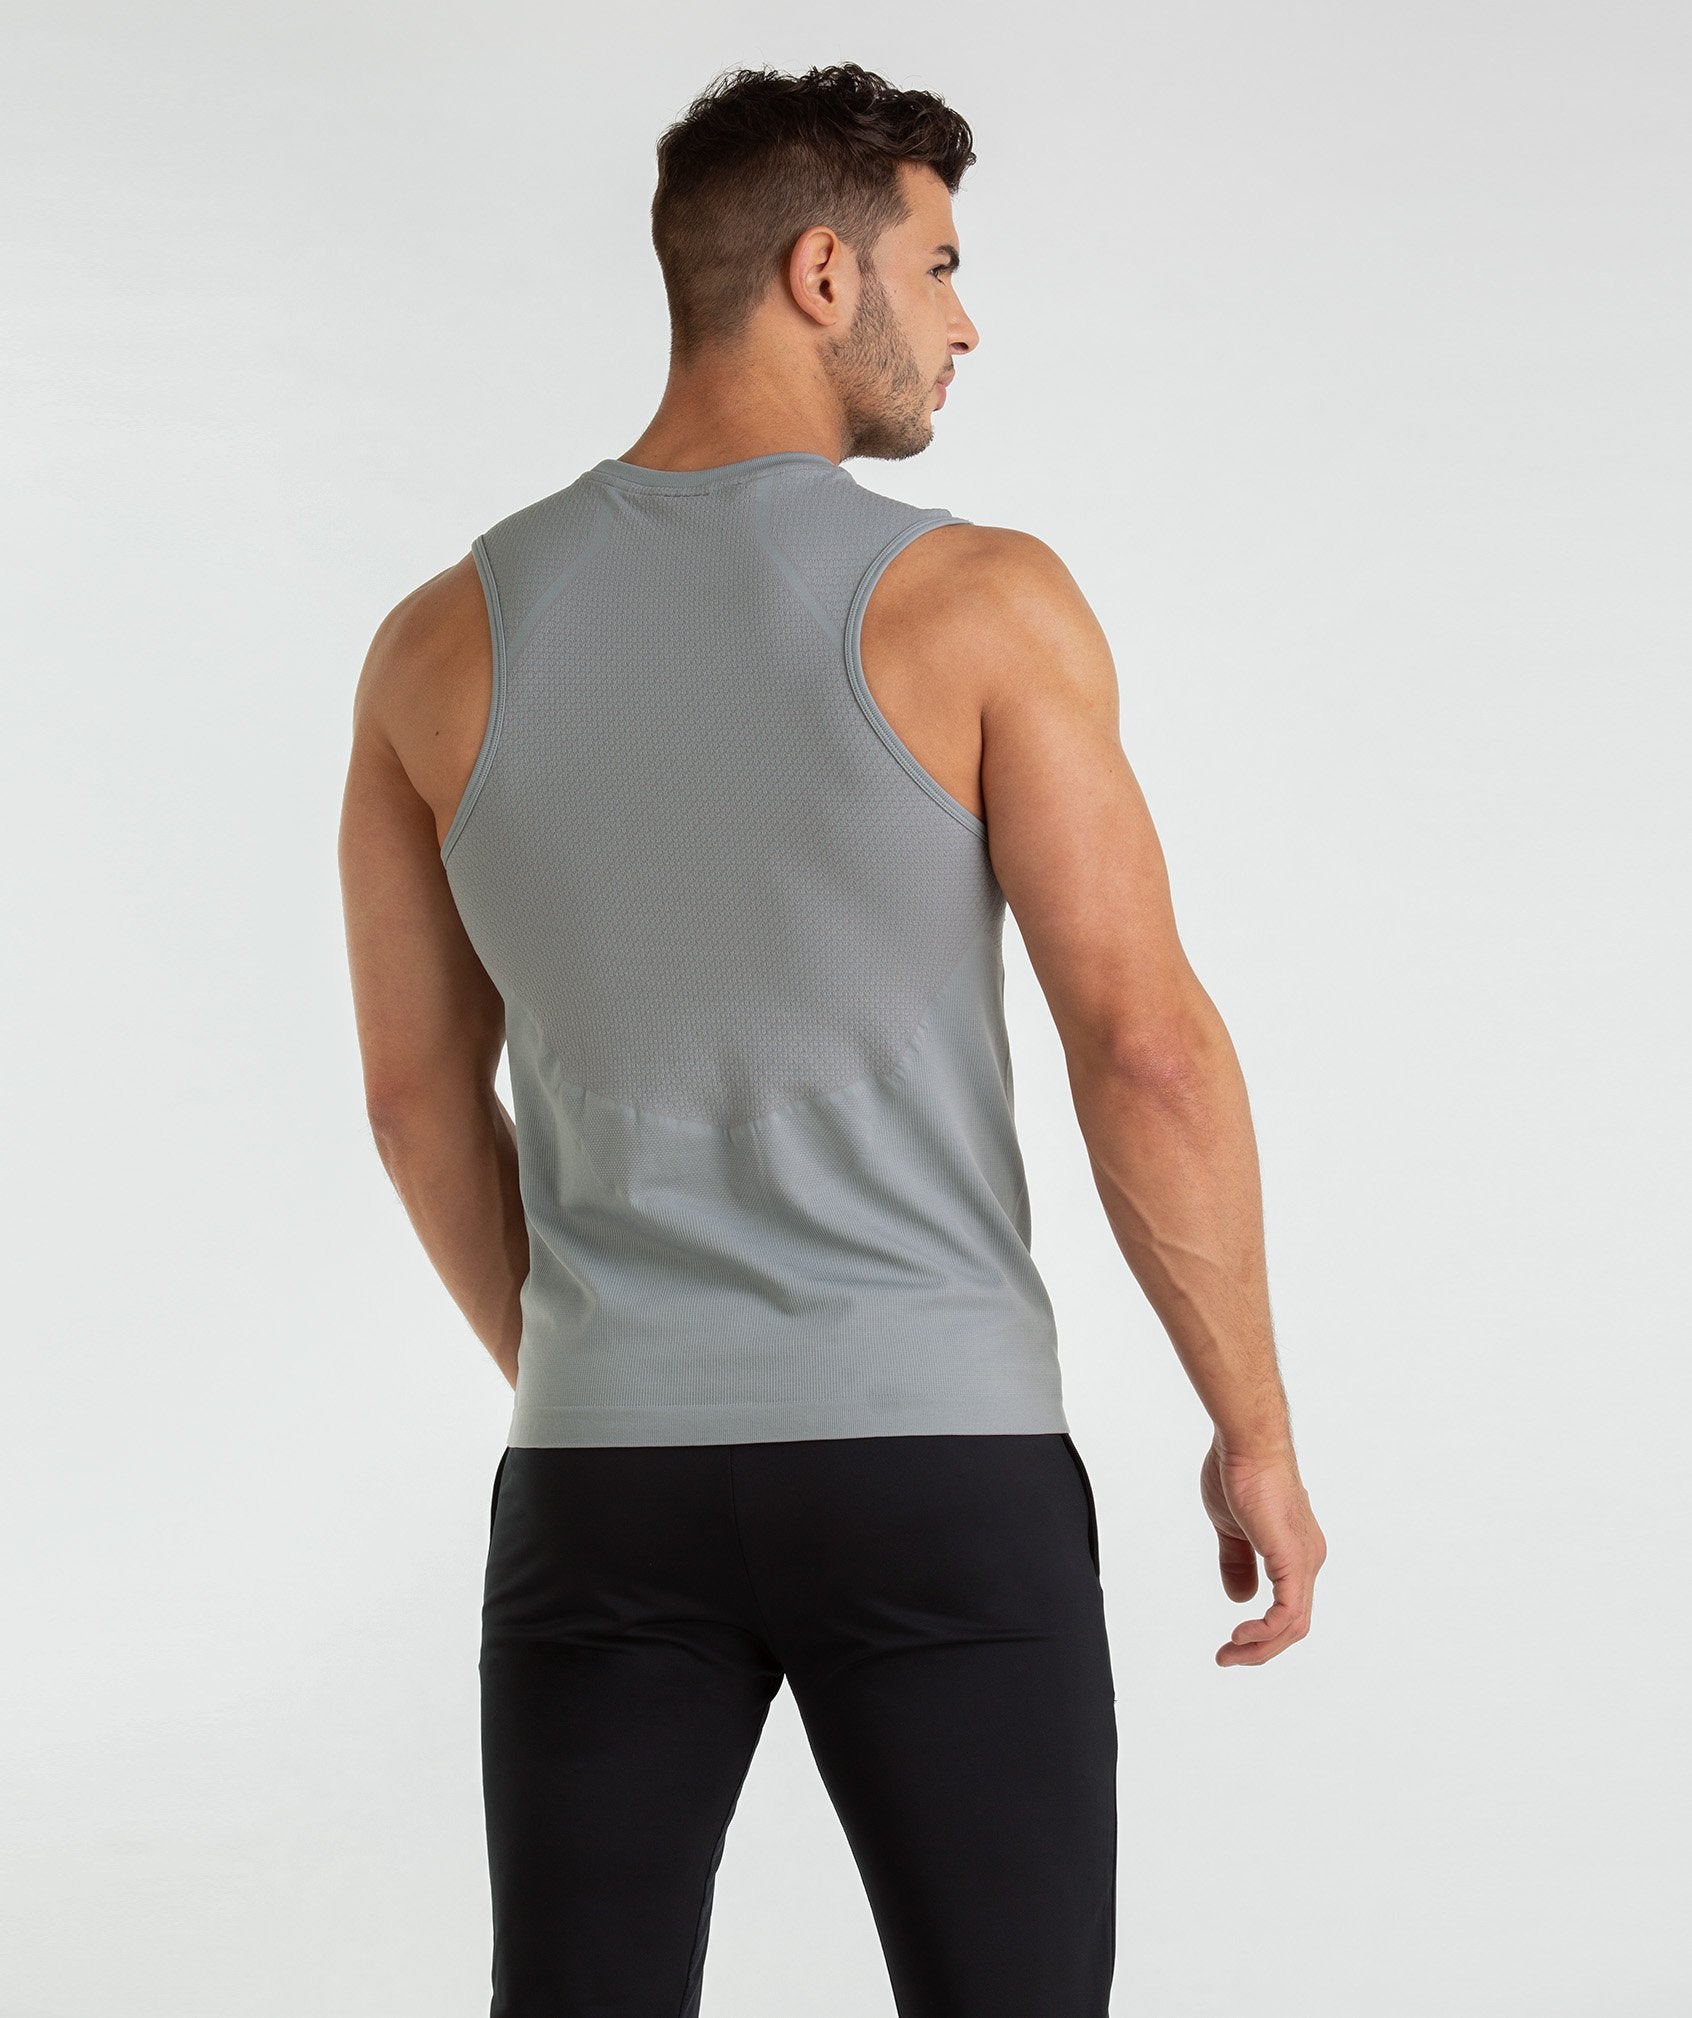 Onyx Imperial Tank in Light Grey - view 2